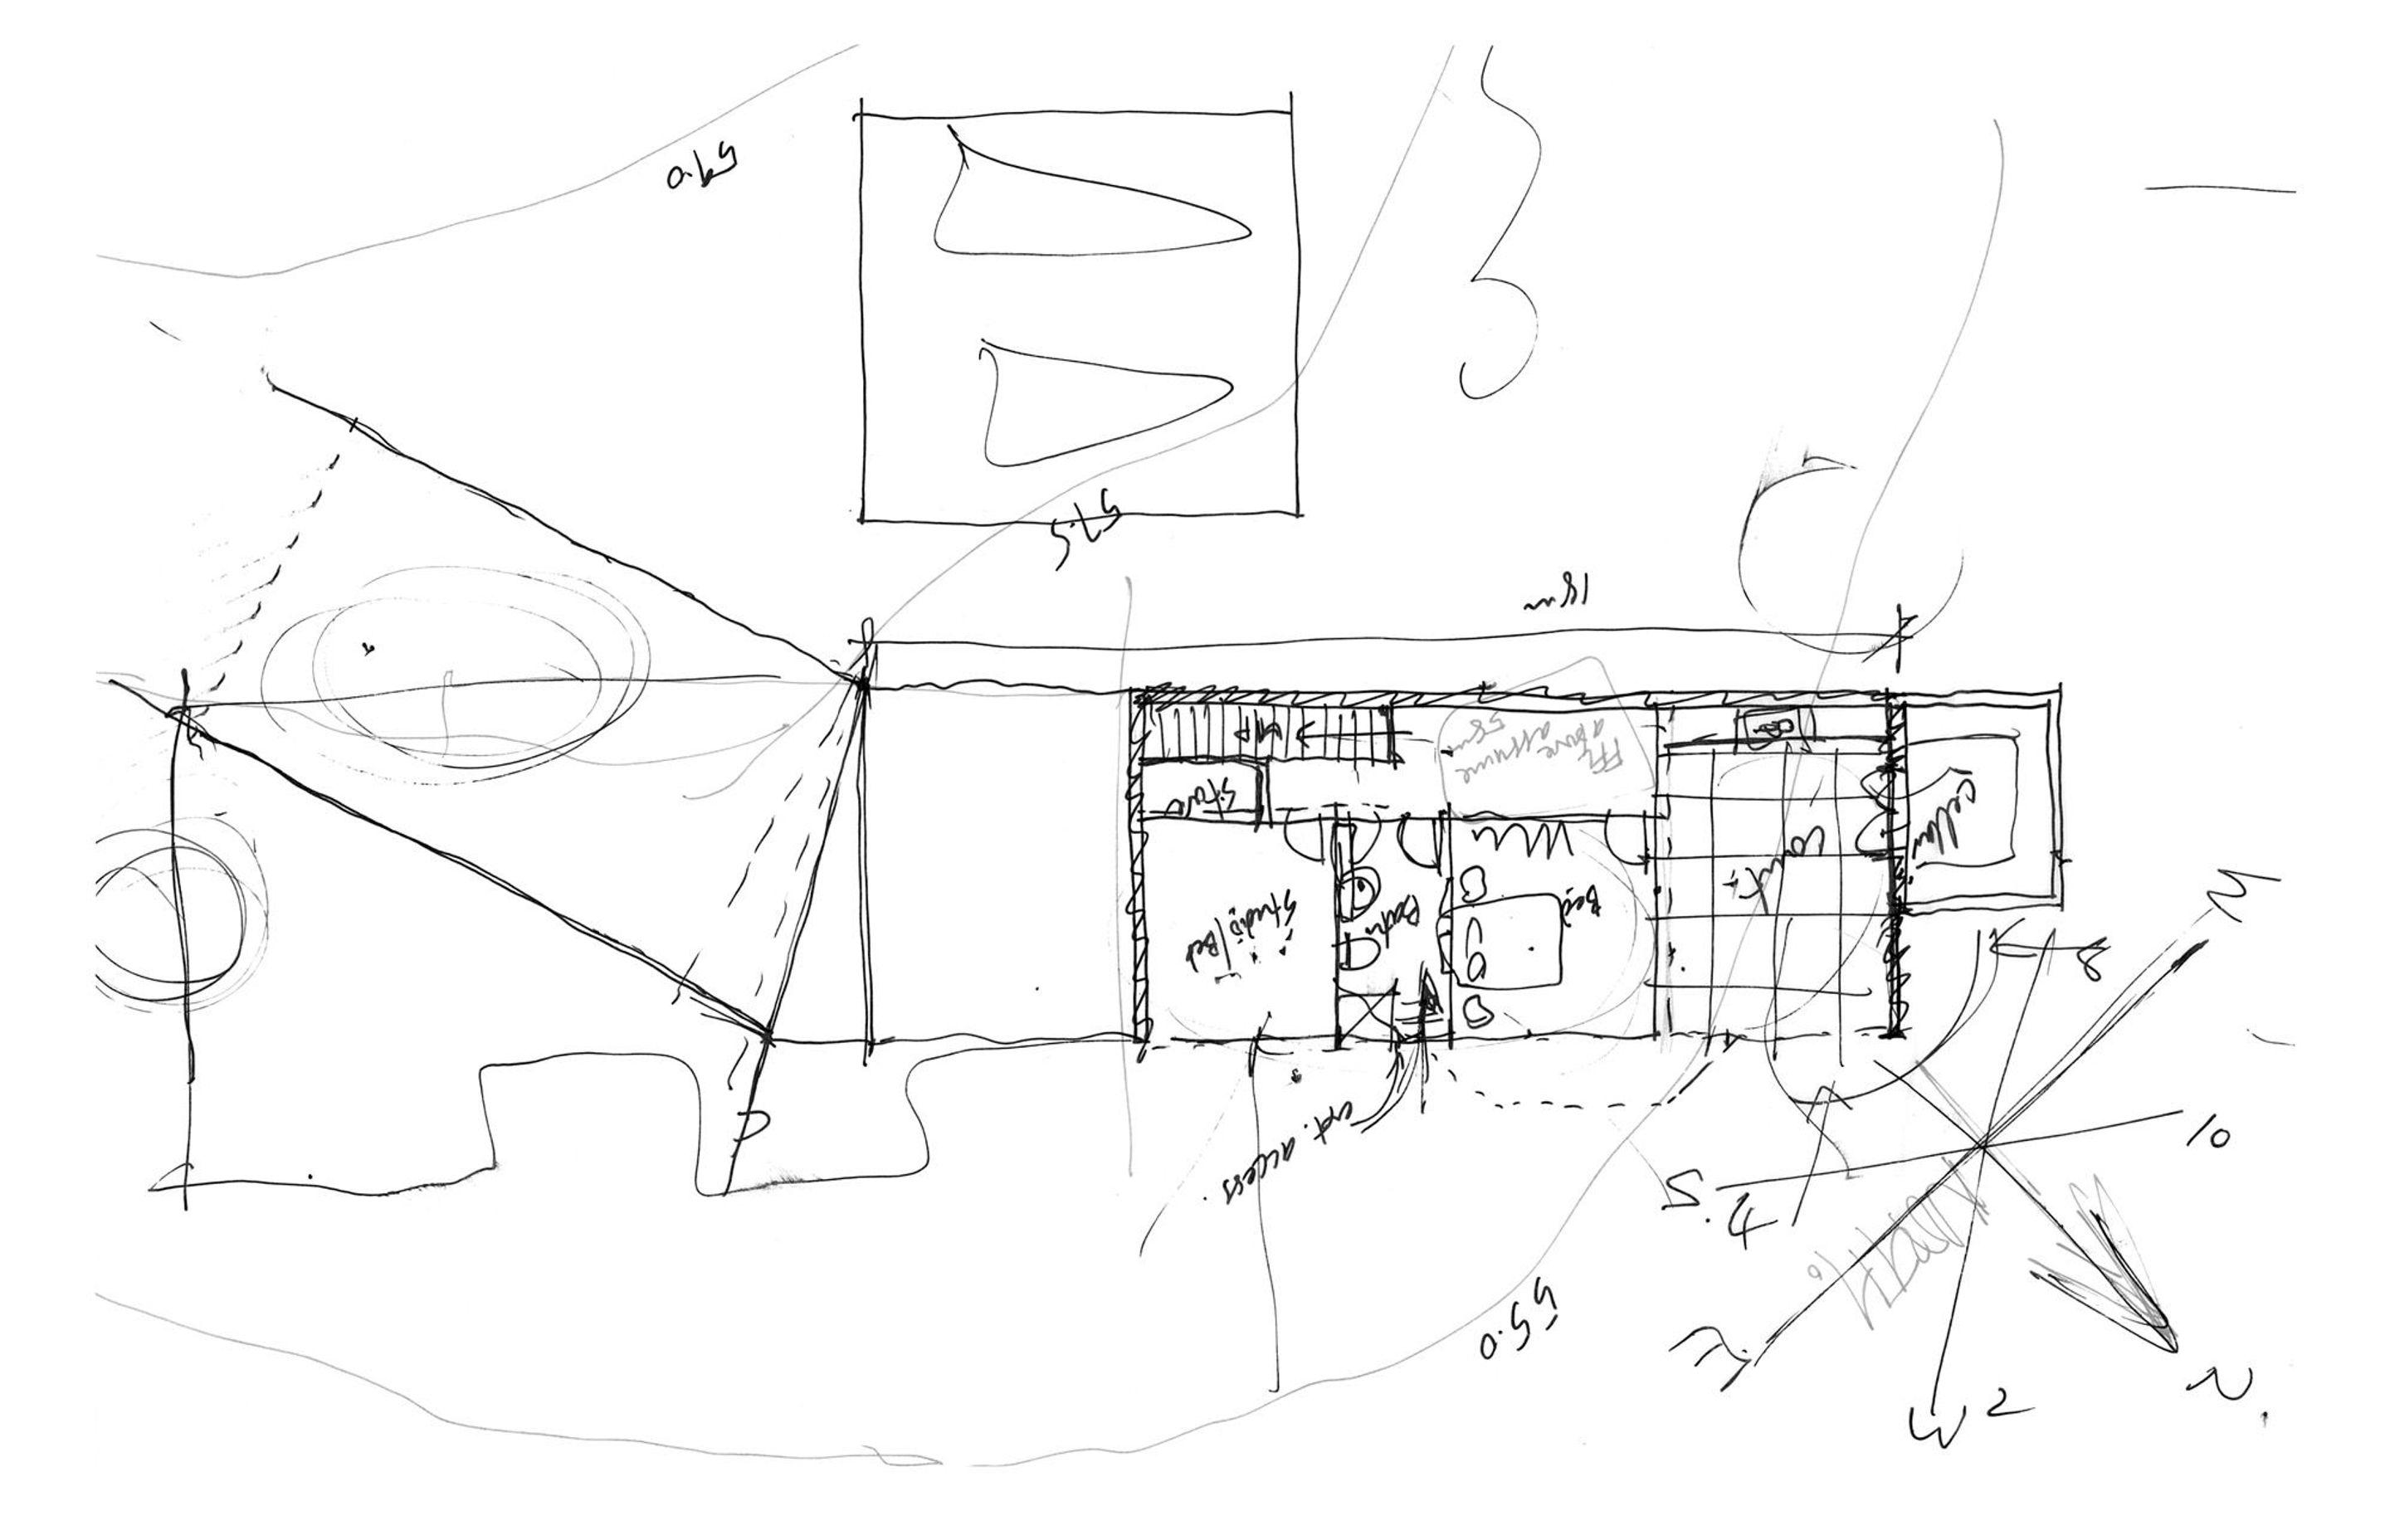 An early architect's sketch of the lower-level plan indicates an original plan to angle the end of the form facing south-east towards Oneroa Bay.